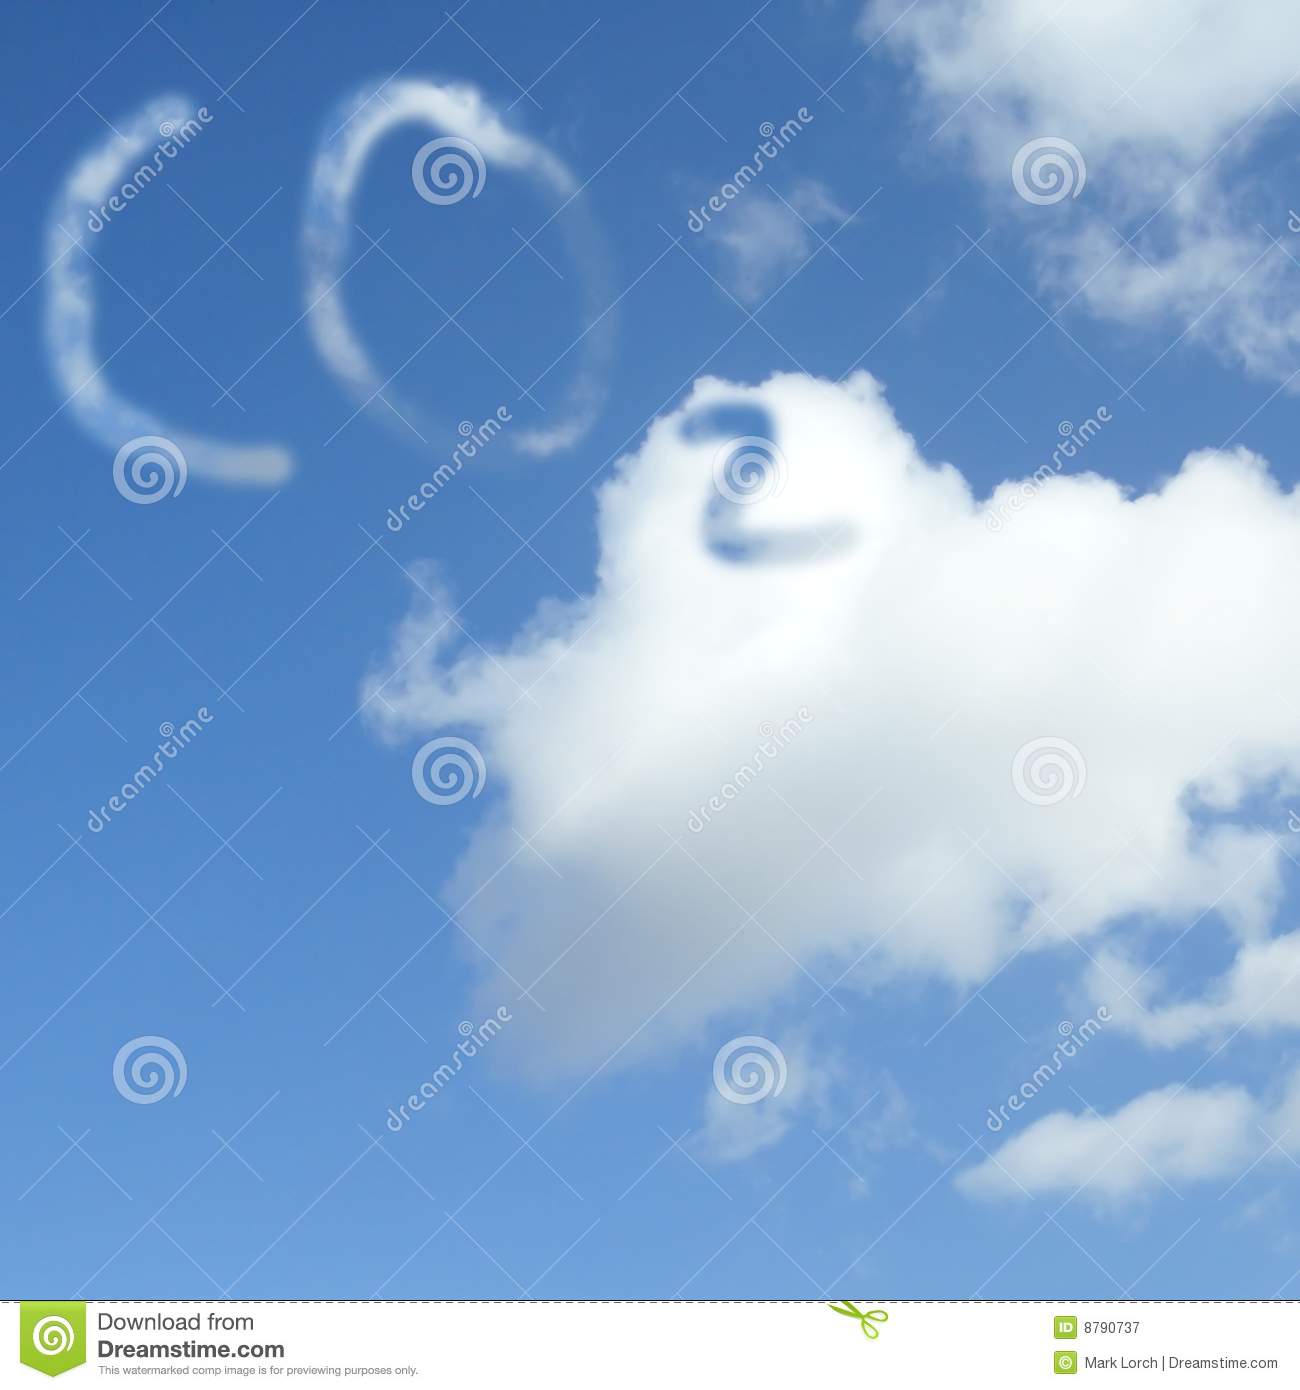 Carbon Dioxide Cloud Royalty Free Stock Photography   Image  8790737